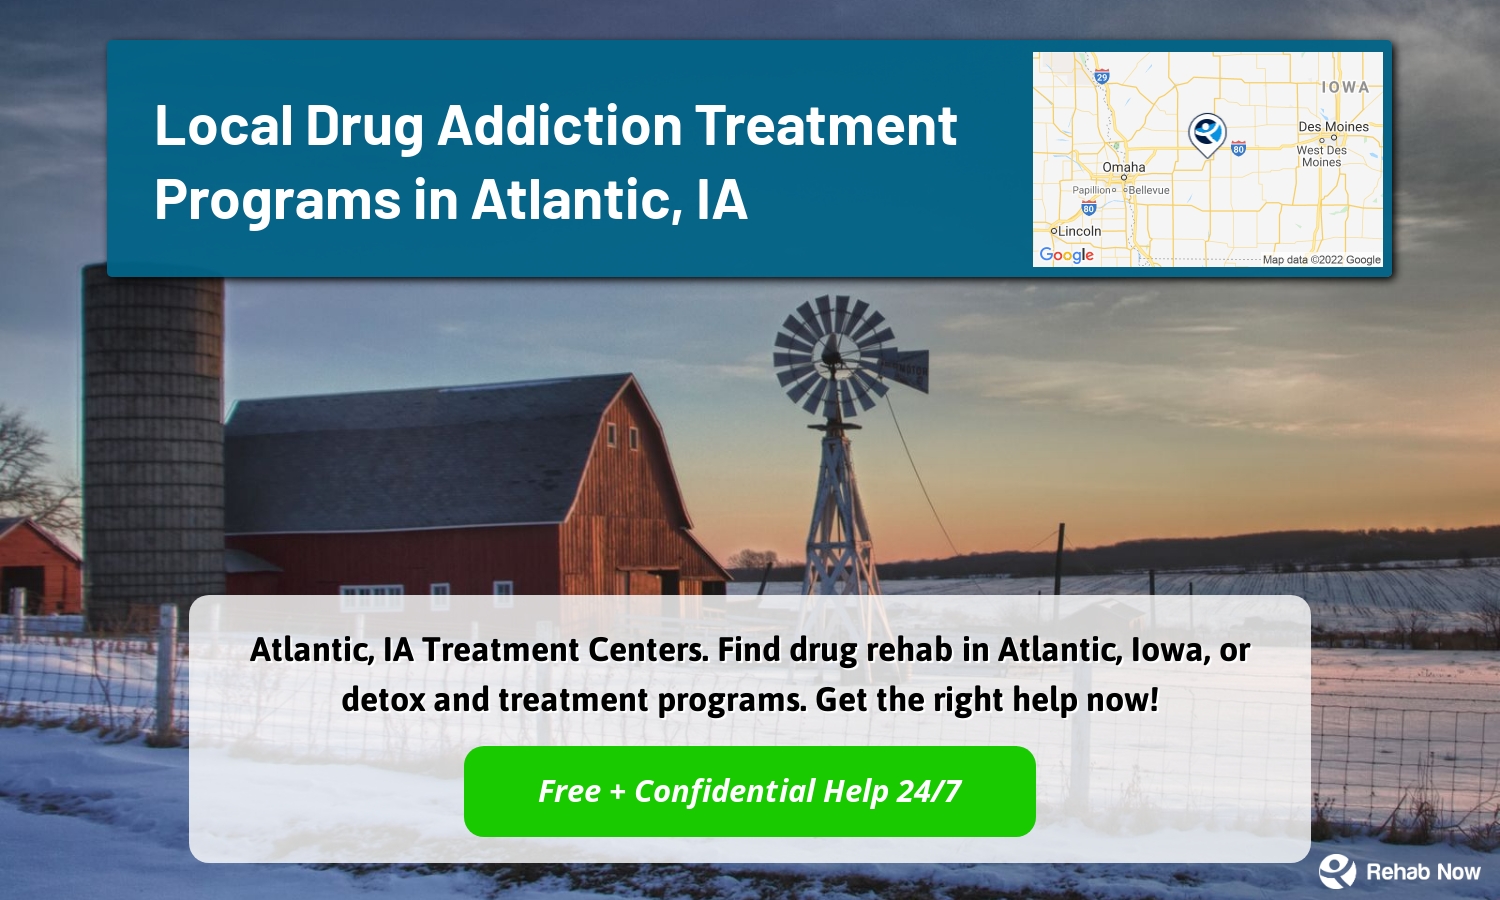 Atlantic, IA Treatment Centers. Find drug rehab in Atlantic, Iowa, or detox and treatment programs. Get the right help now!